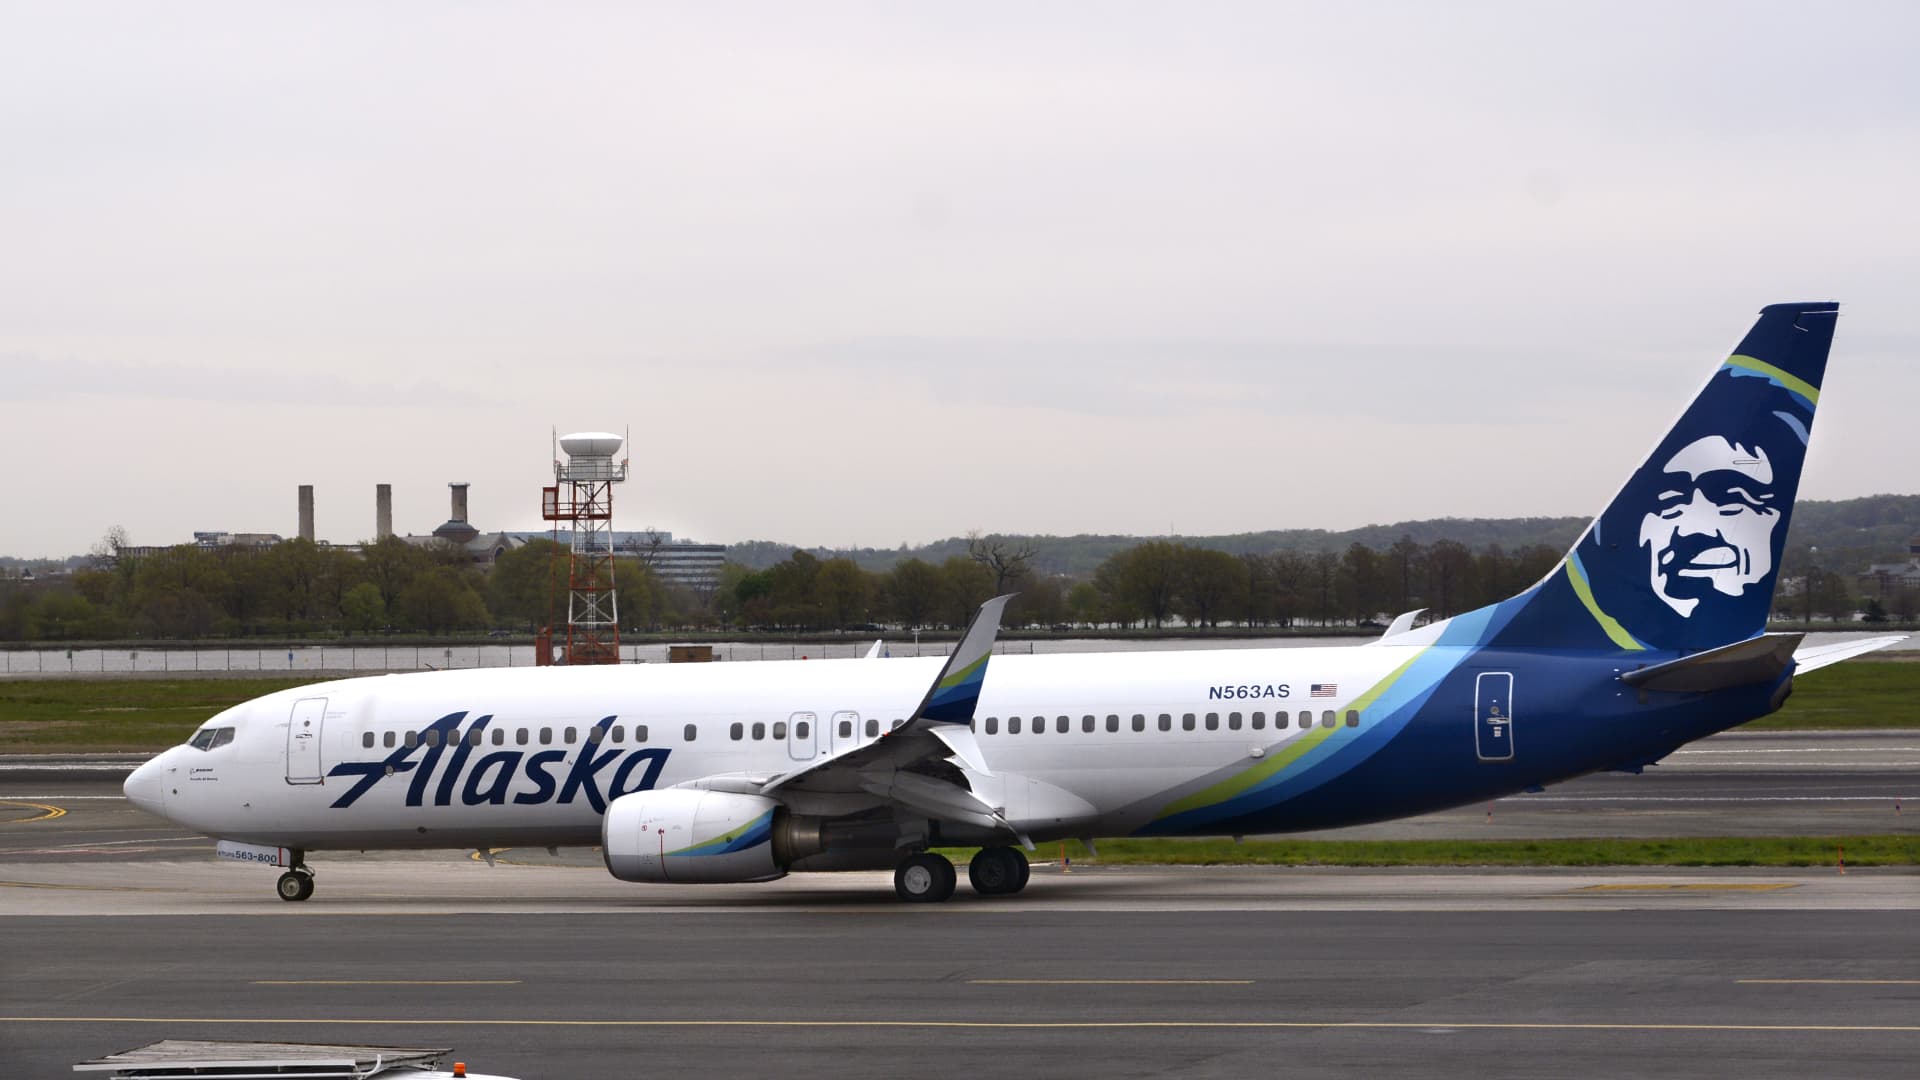 Alaska Airlines has been named among the world's safest airlines for the past six consecutive years.